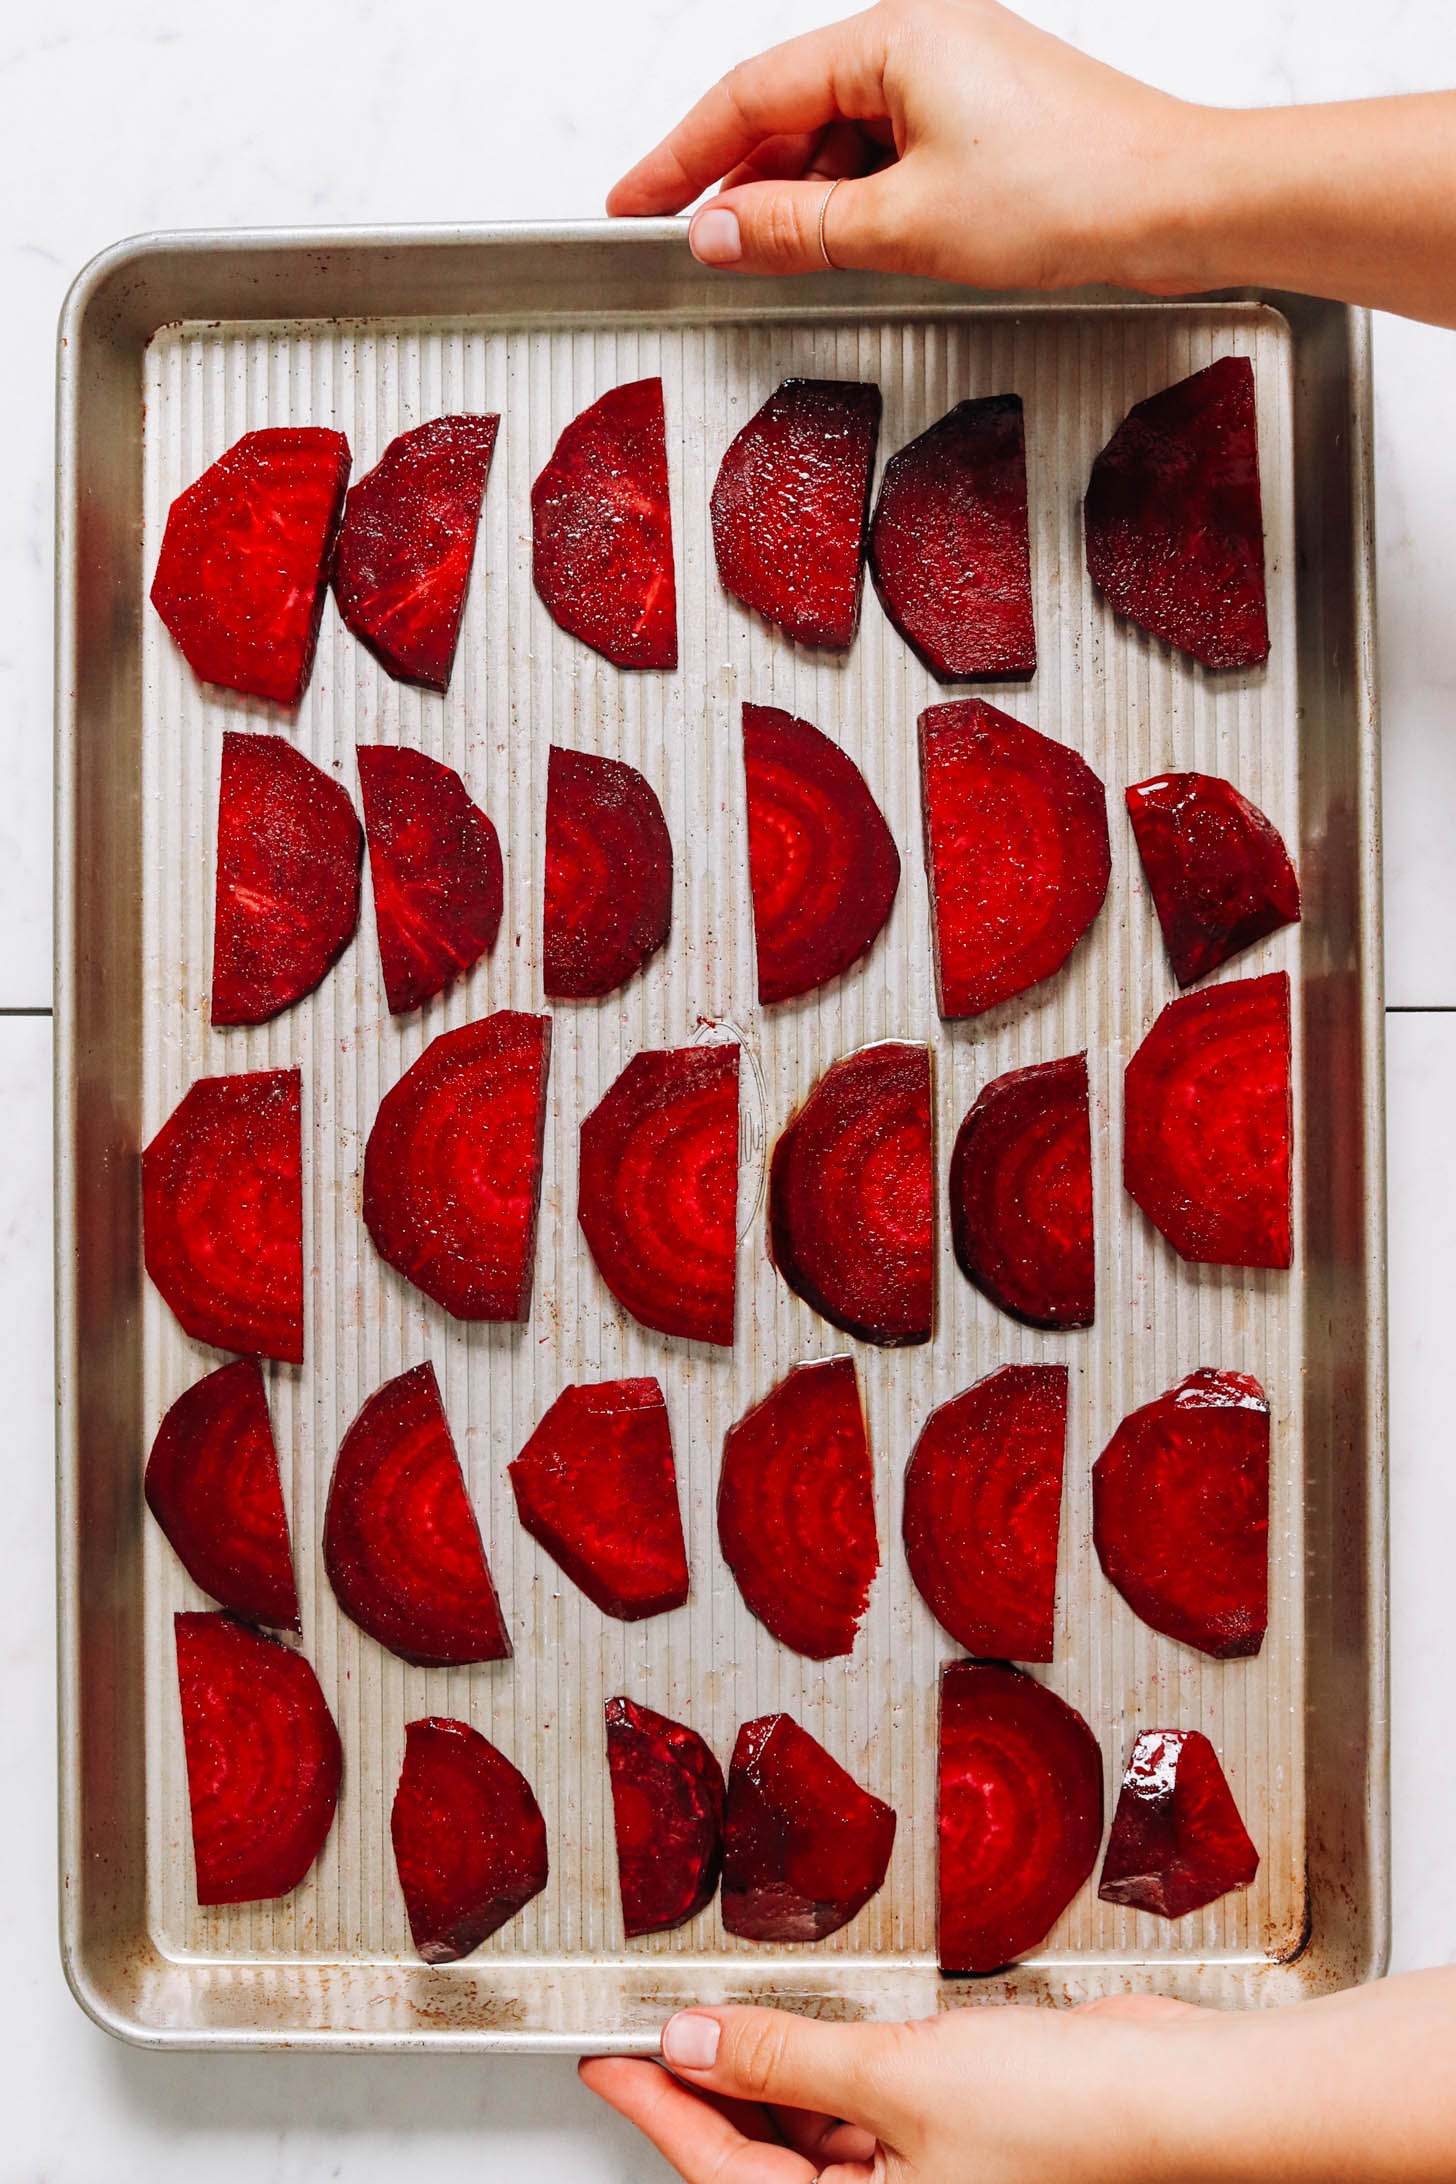 Thinly sliced beets on a baking sheet